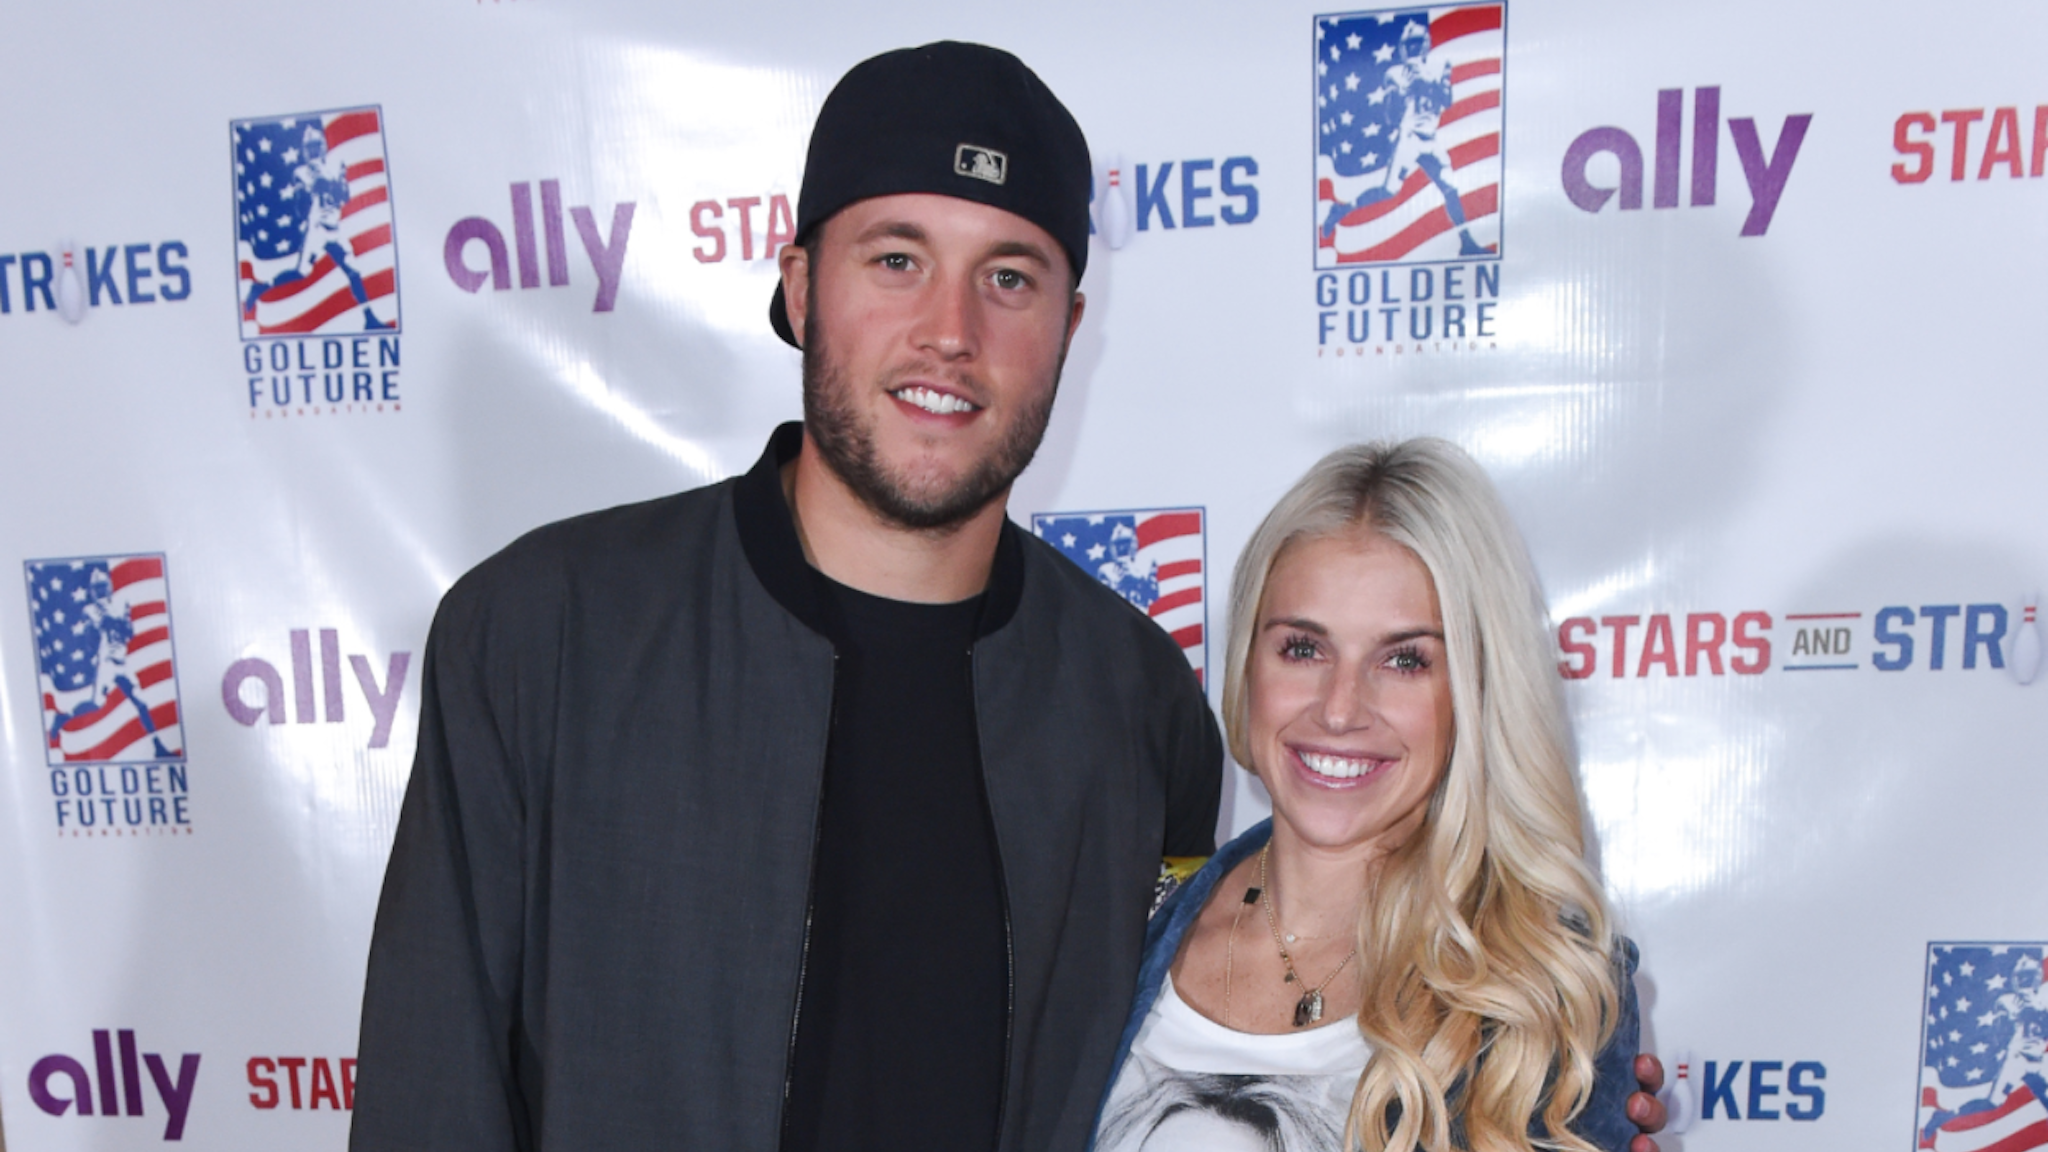 DETROIT, MI - SEPTEMBER 11: Matthew Stafford and Kelly Stafford arrive to Golden Tate's 3rd Annual Stars and Strikes Bowling Event on September 11, 2017 in Detroit, Michigan.